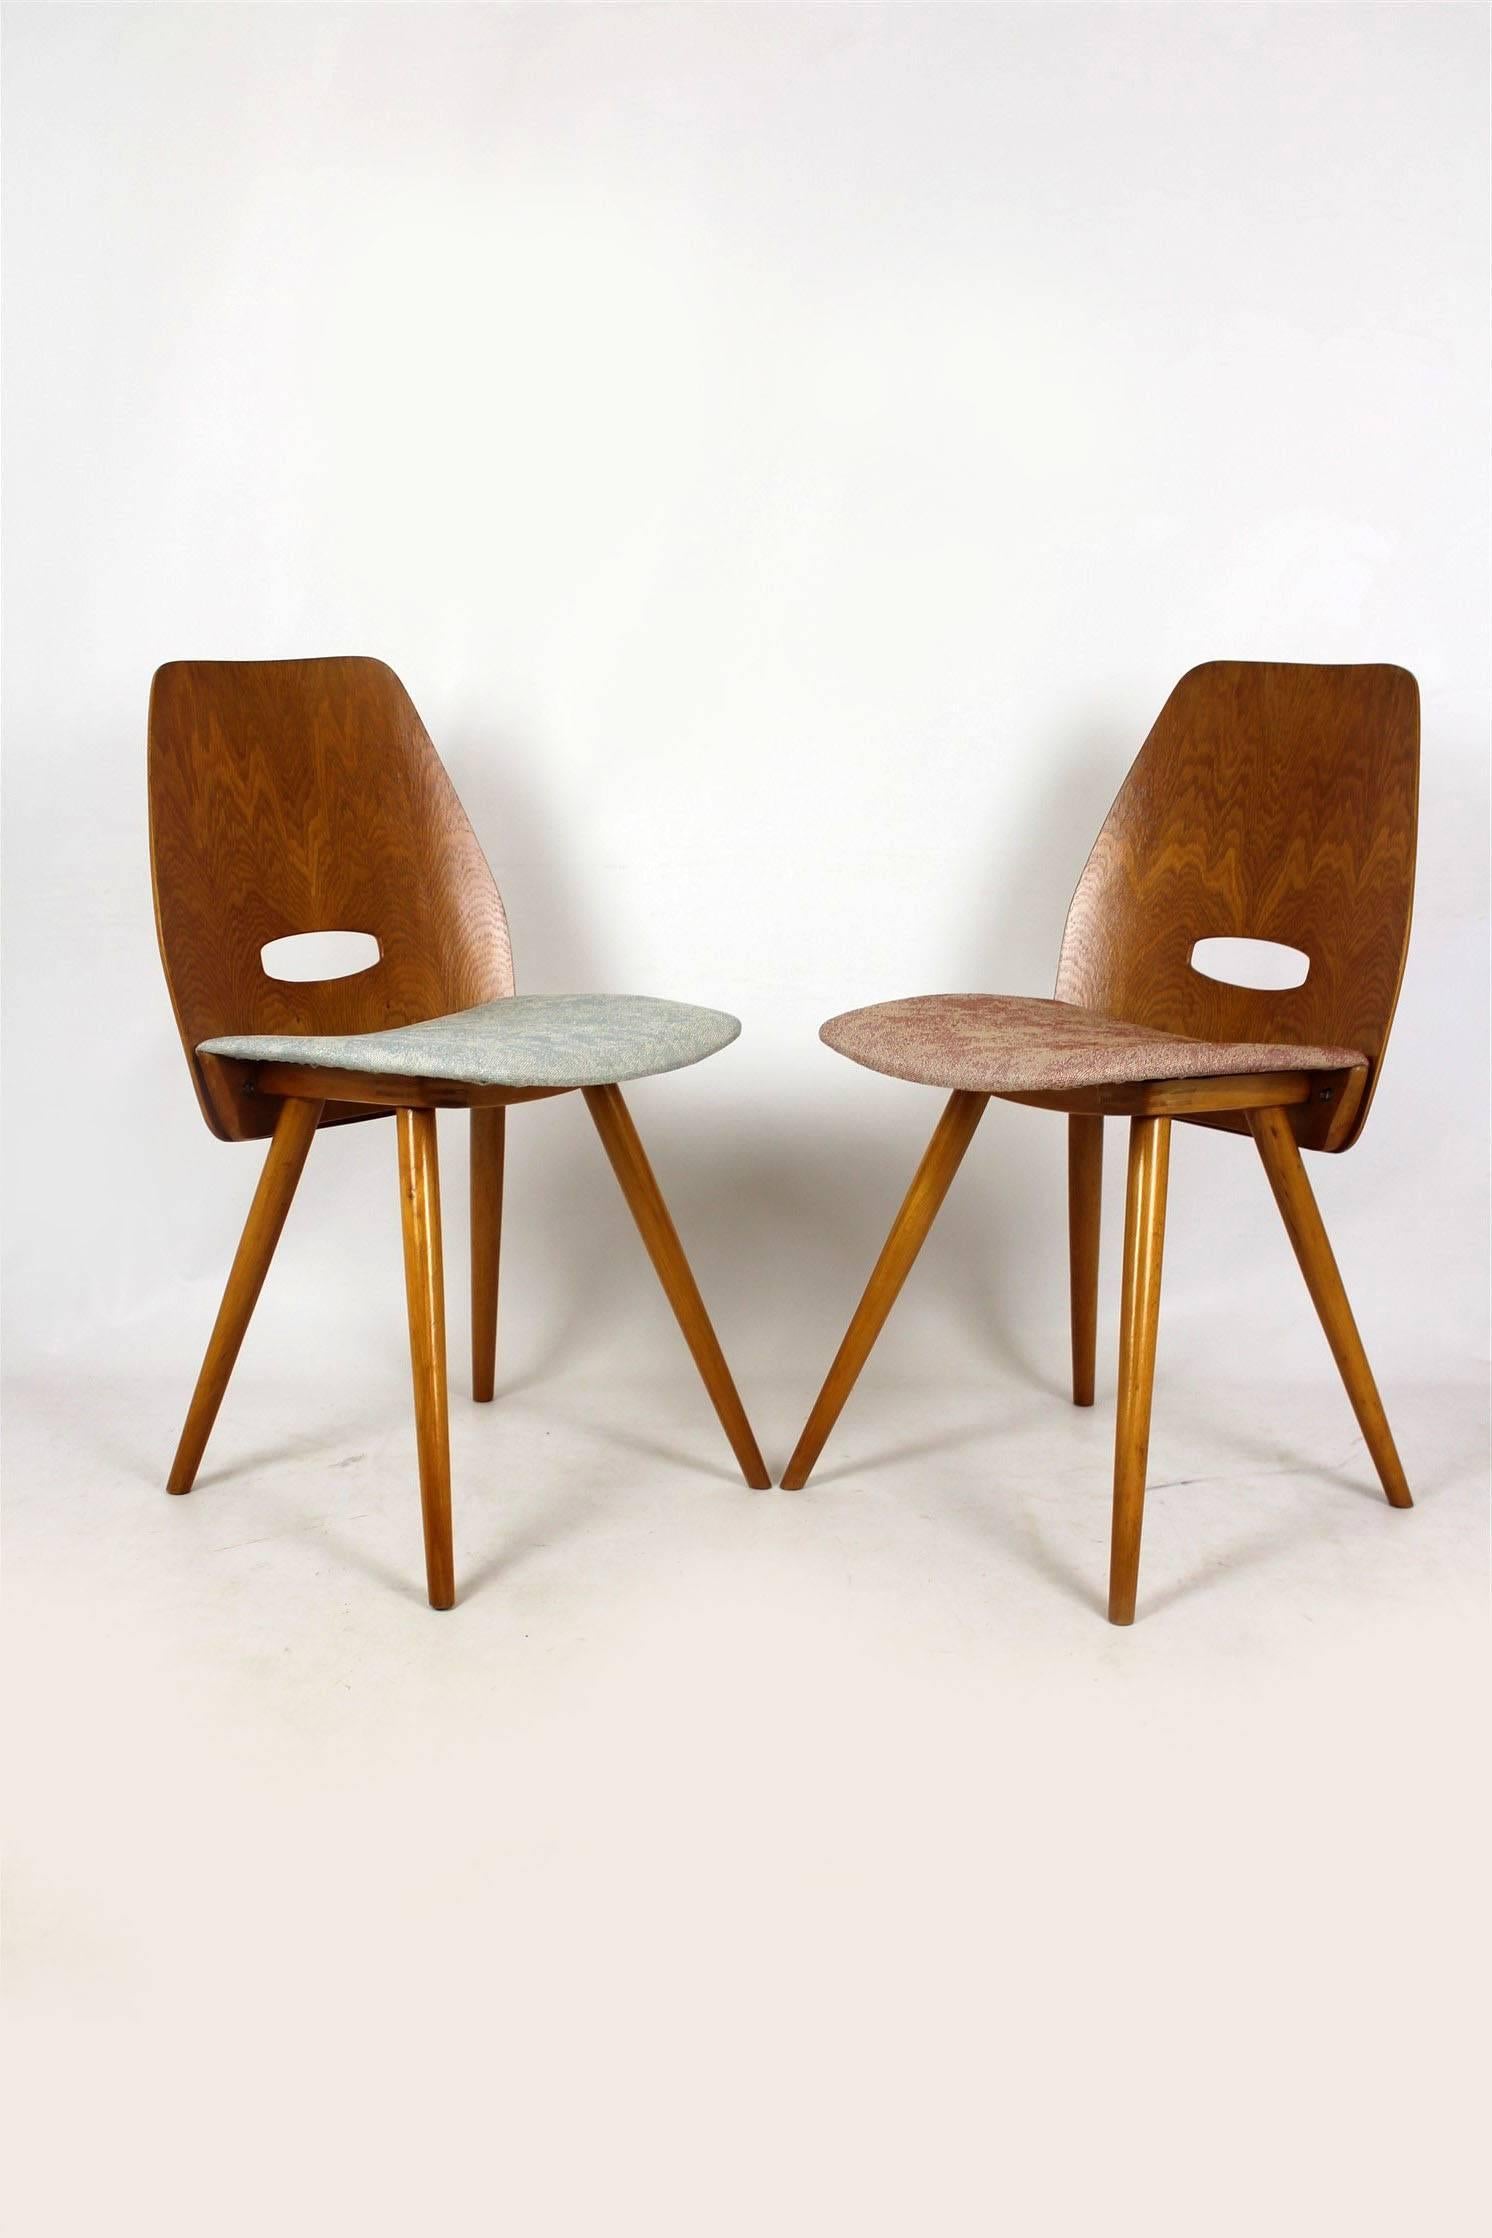 20th Century Dining Chairs in Pastel Fabric by Frantisek Jirak for Tatra, 1960s, Set of Four